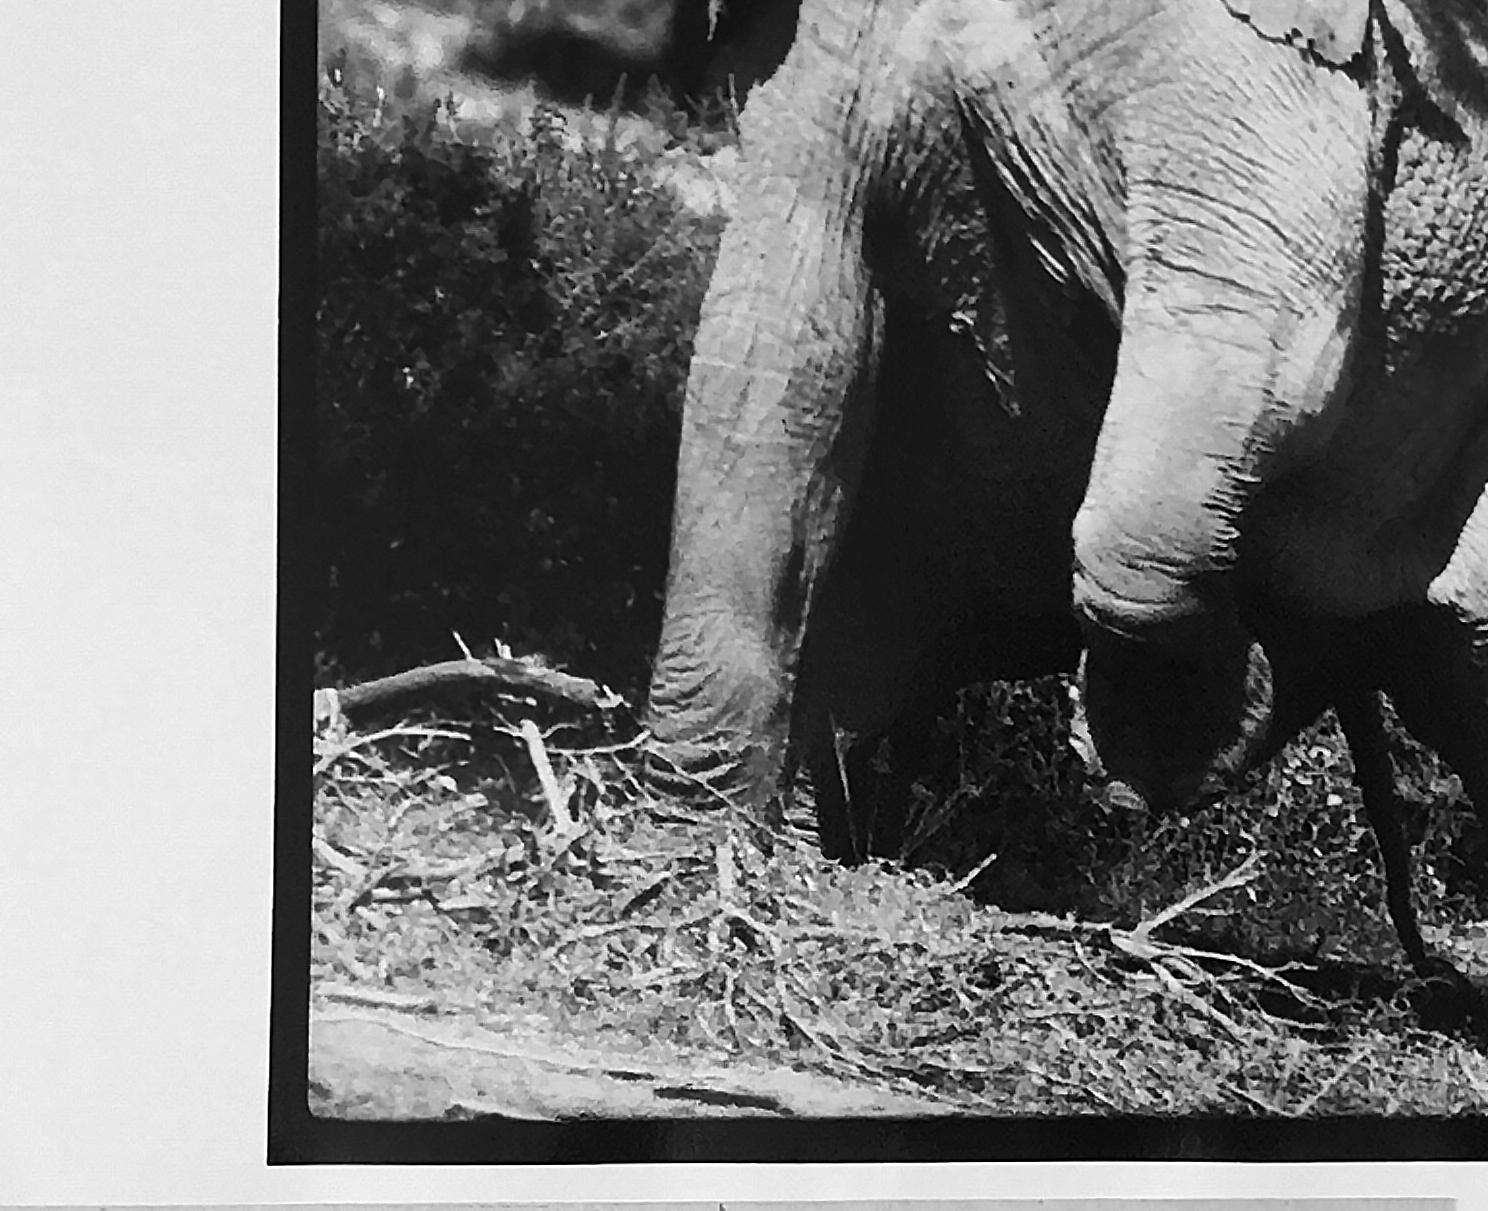 Charge Déléphant
Elephant reaching for the last branch on a tree, Kenya, 1965
Peter Beard/Unsigned
The original photograph unsigned but documented by its inclusion in 